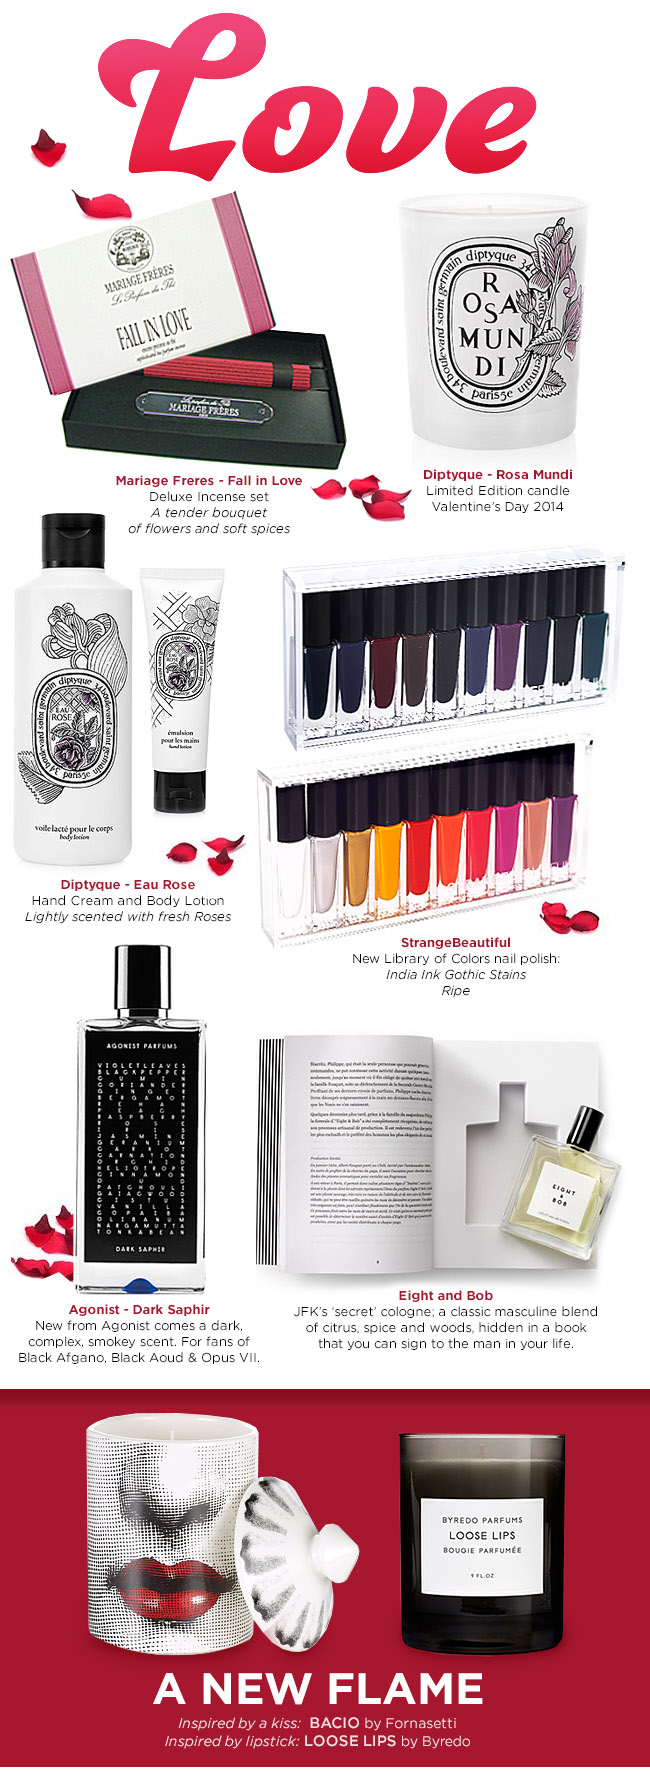 Give Love for Valentine's - Mariage Frere:Fall In Love Incense, Diptyque:Rosa Mundi Candle, Eau Rose Body Lotion, Strange Beautiful Nail Polish, Agonist:Dark Saphir, Eight and Bob, Fornasetti Bacio, Byredo Loose Lips Candle.